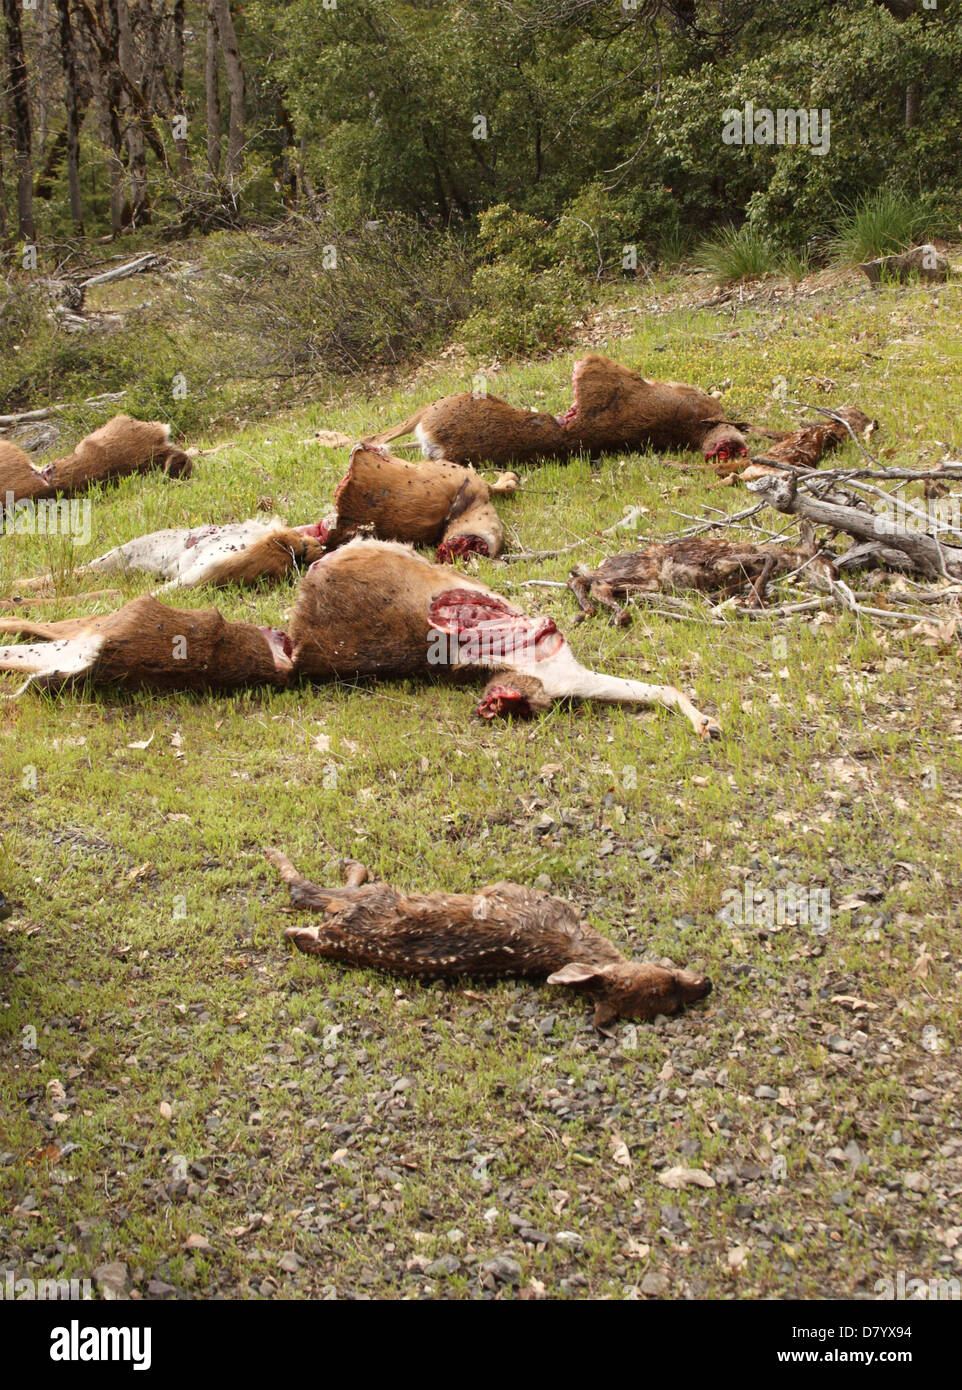 The scenes from deer poaching in California. Stock Photo